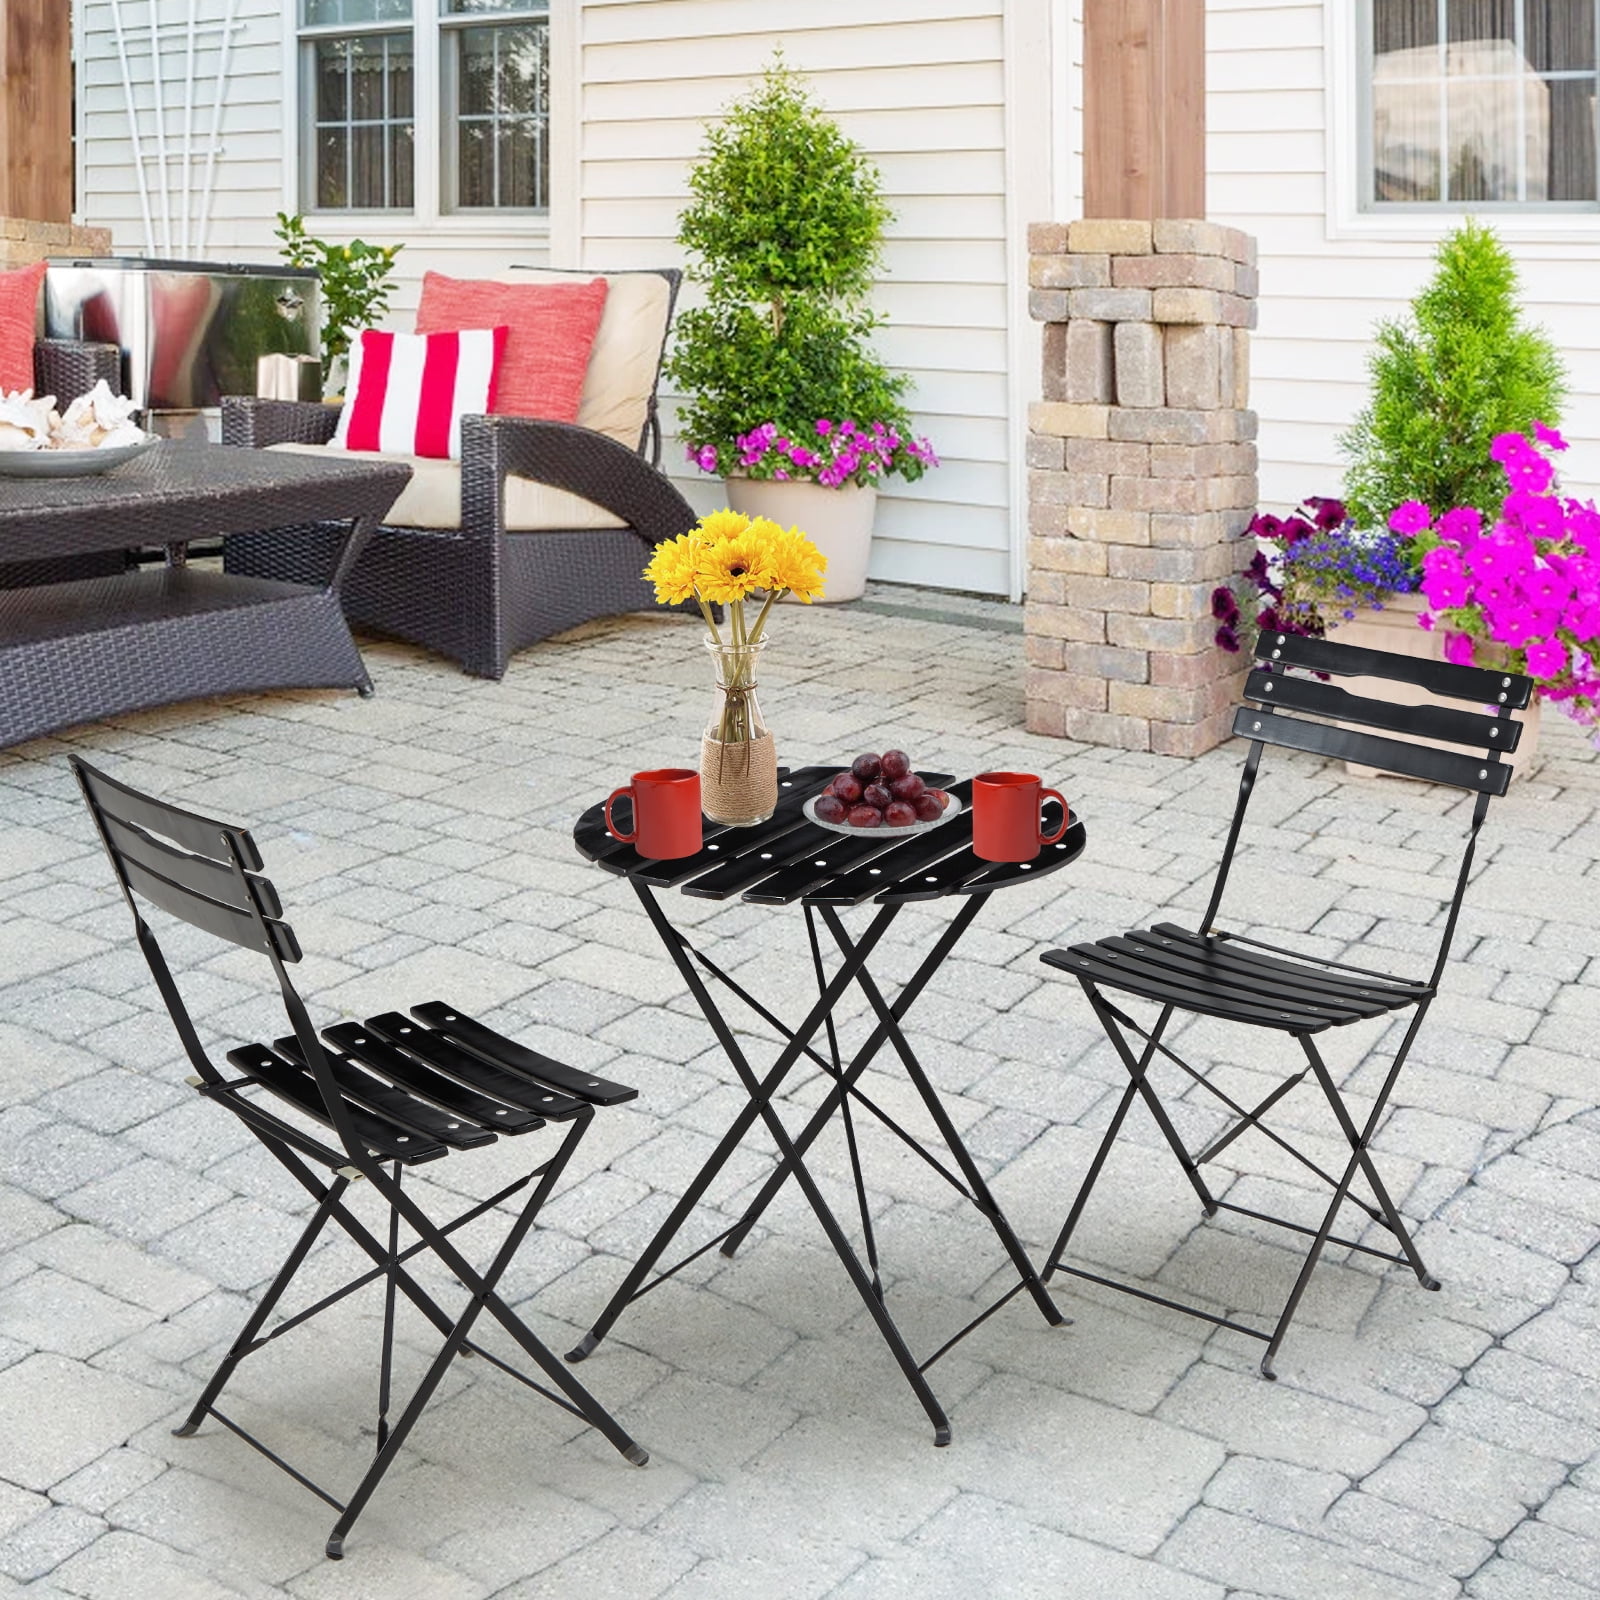 3 Pc Retro Chair Metal Patio Set Table Rocking Chairs Red Outdoor Backyard 